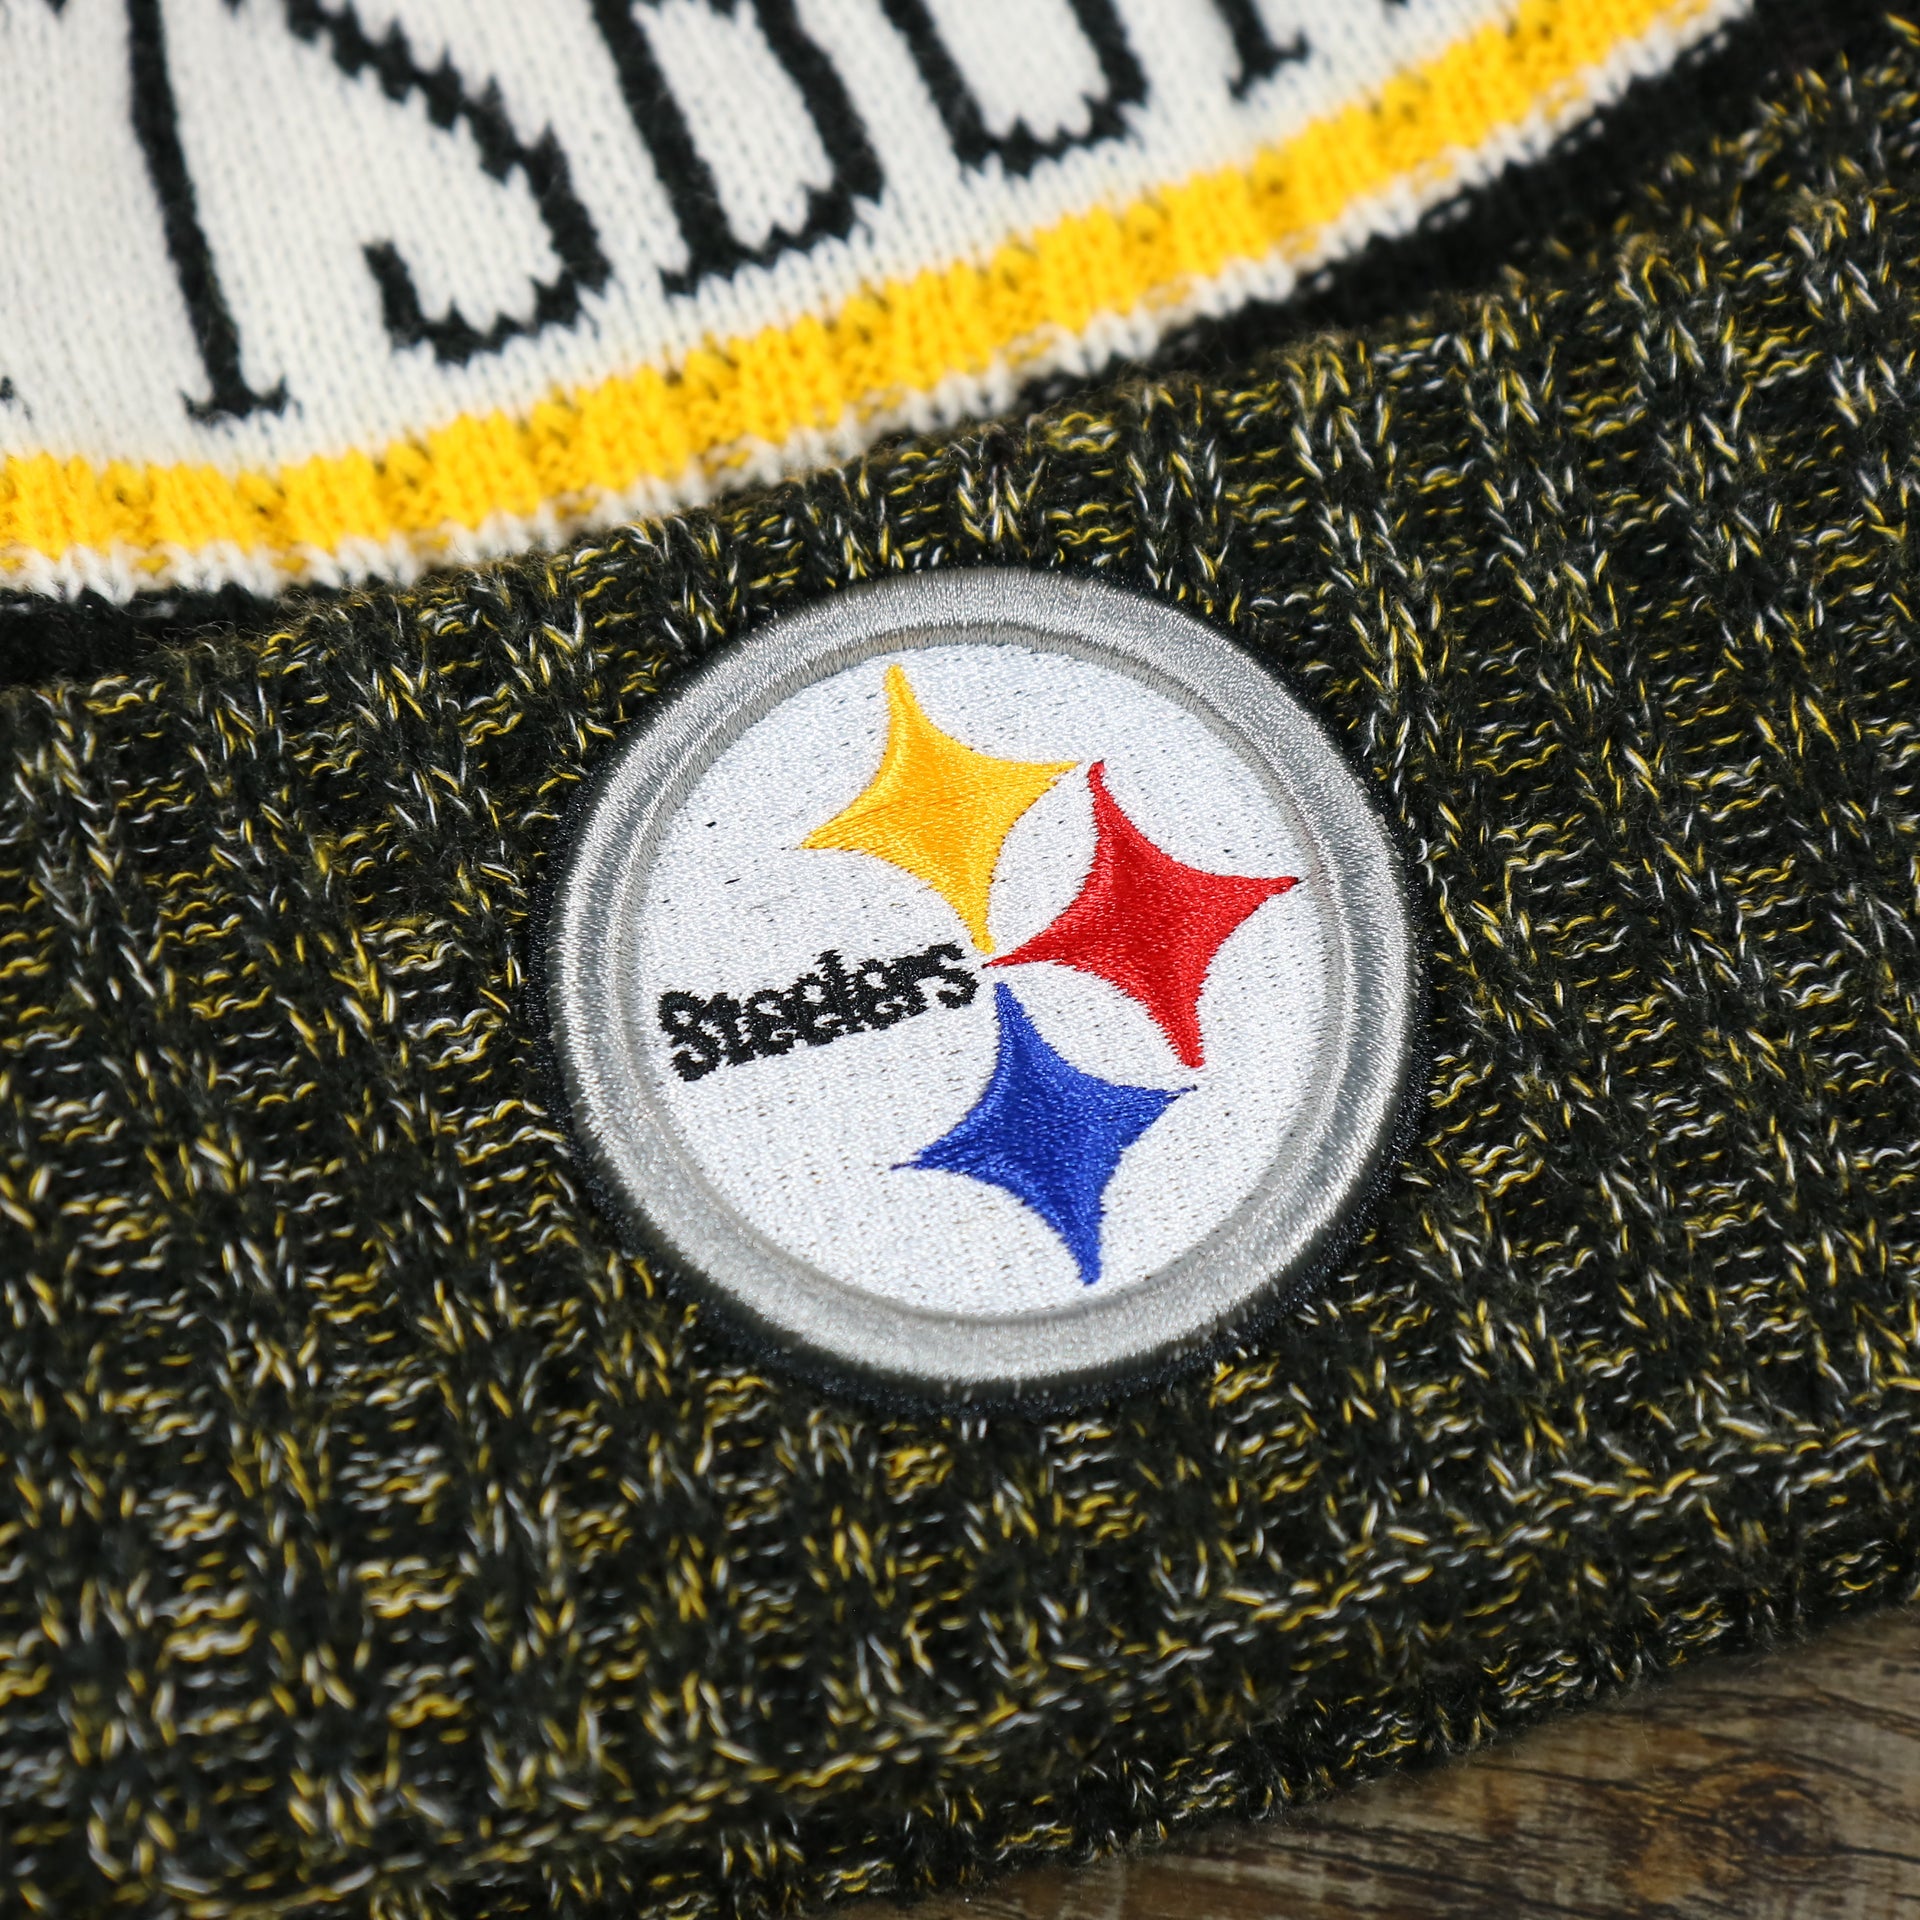 The Steelers Logo on the Pittsburgh Steelers On Field Cold Weather Striped Wordmark Pom Pom Winter Beanie | Black and Yellow Beanie